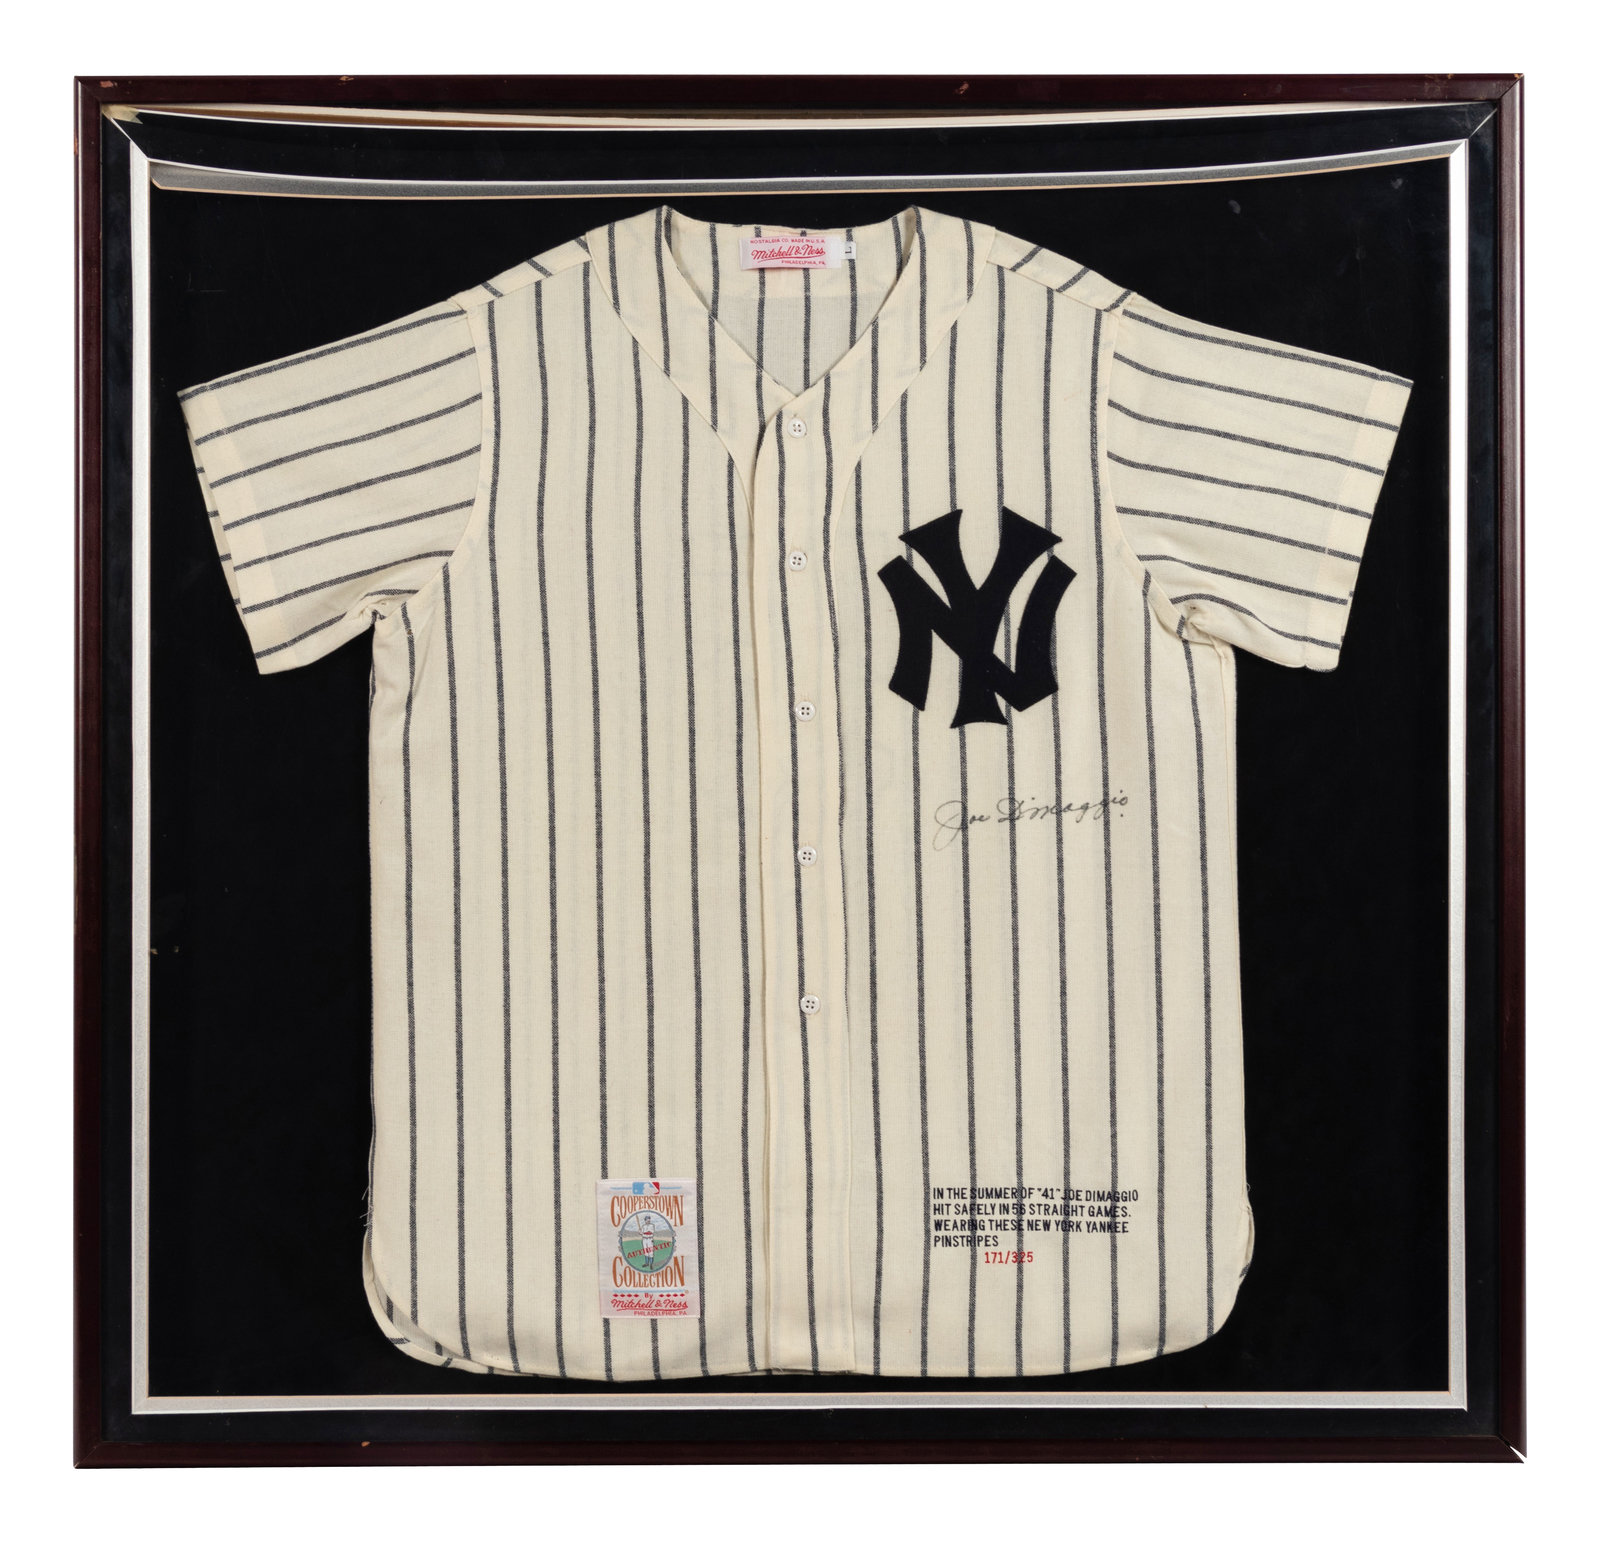 A Joe DiMaggio Signed Autograph Jersey Presentation Formerly Displayed at  Ditka's Restaurant